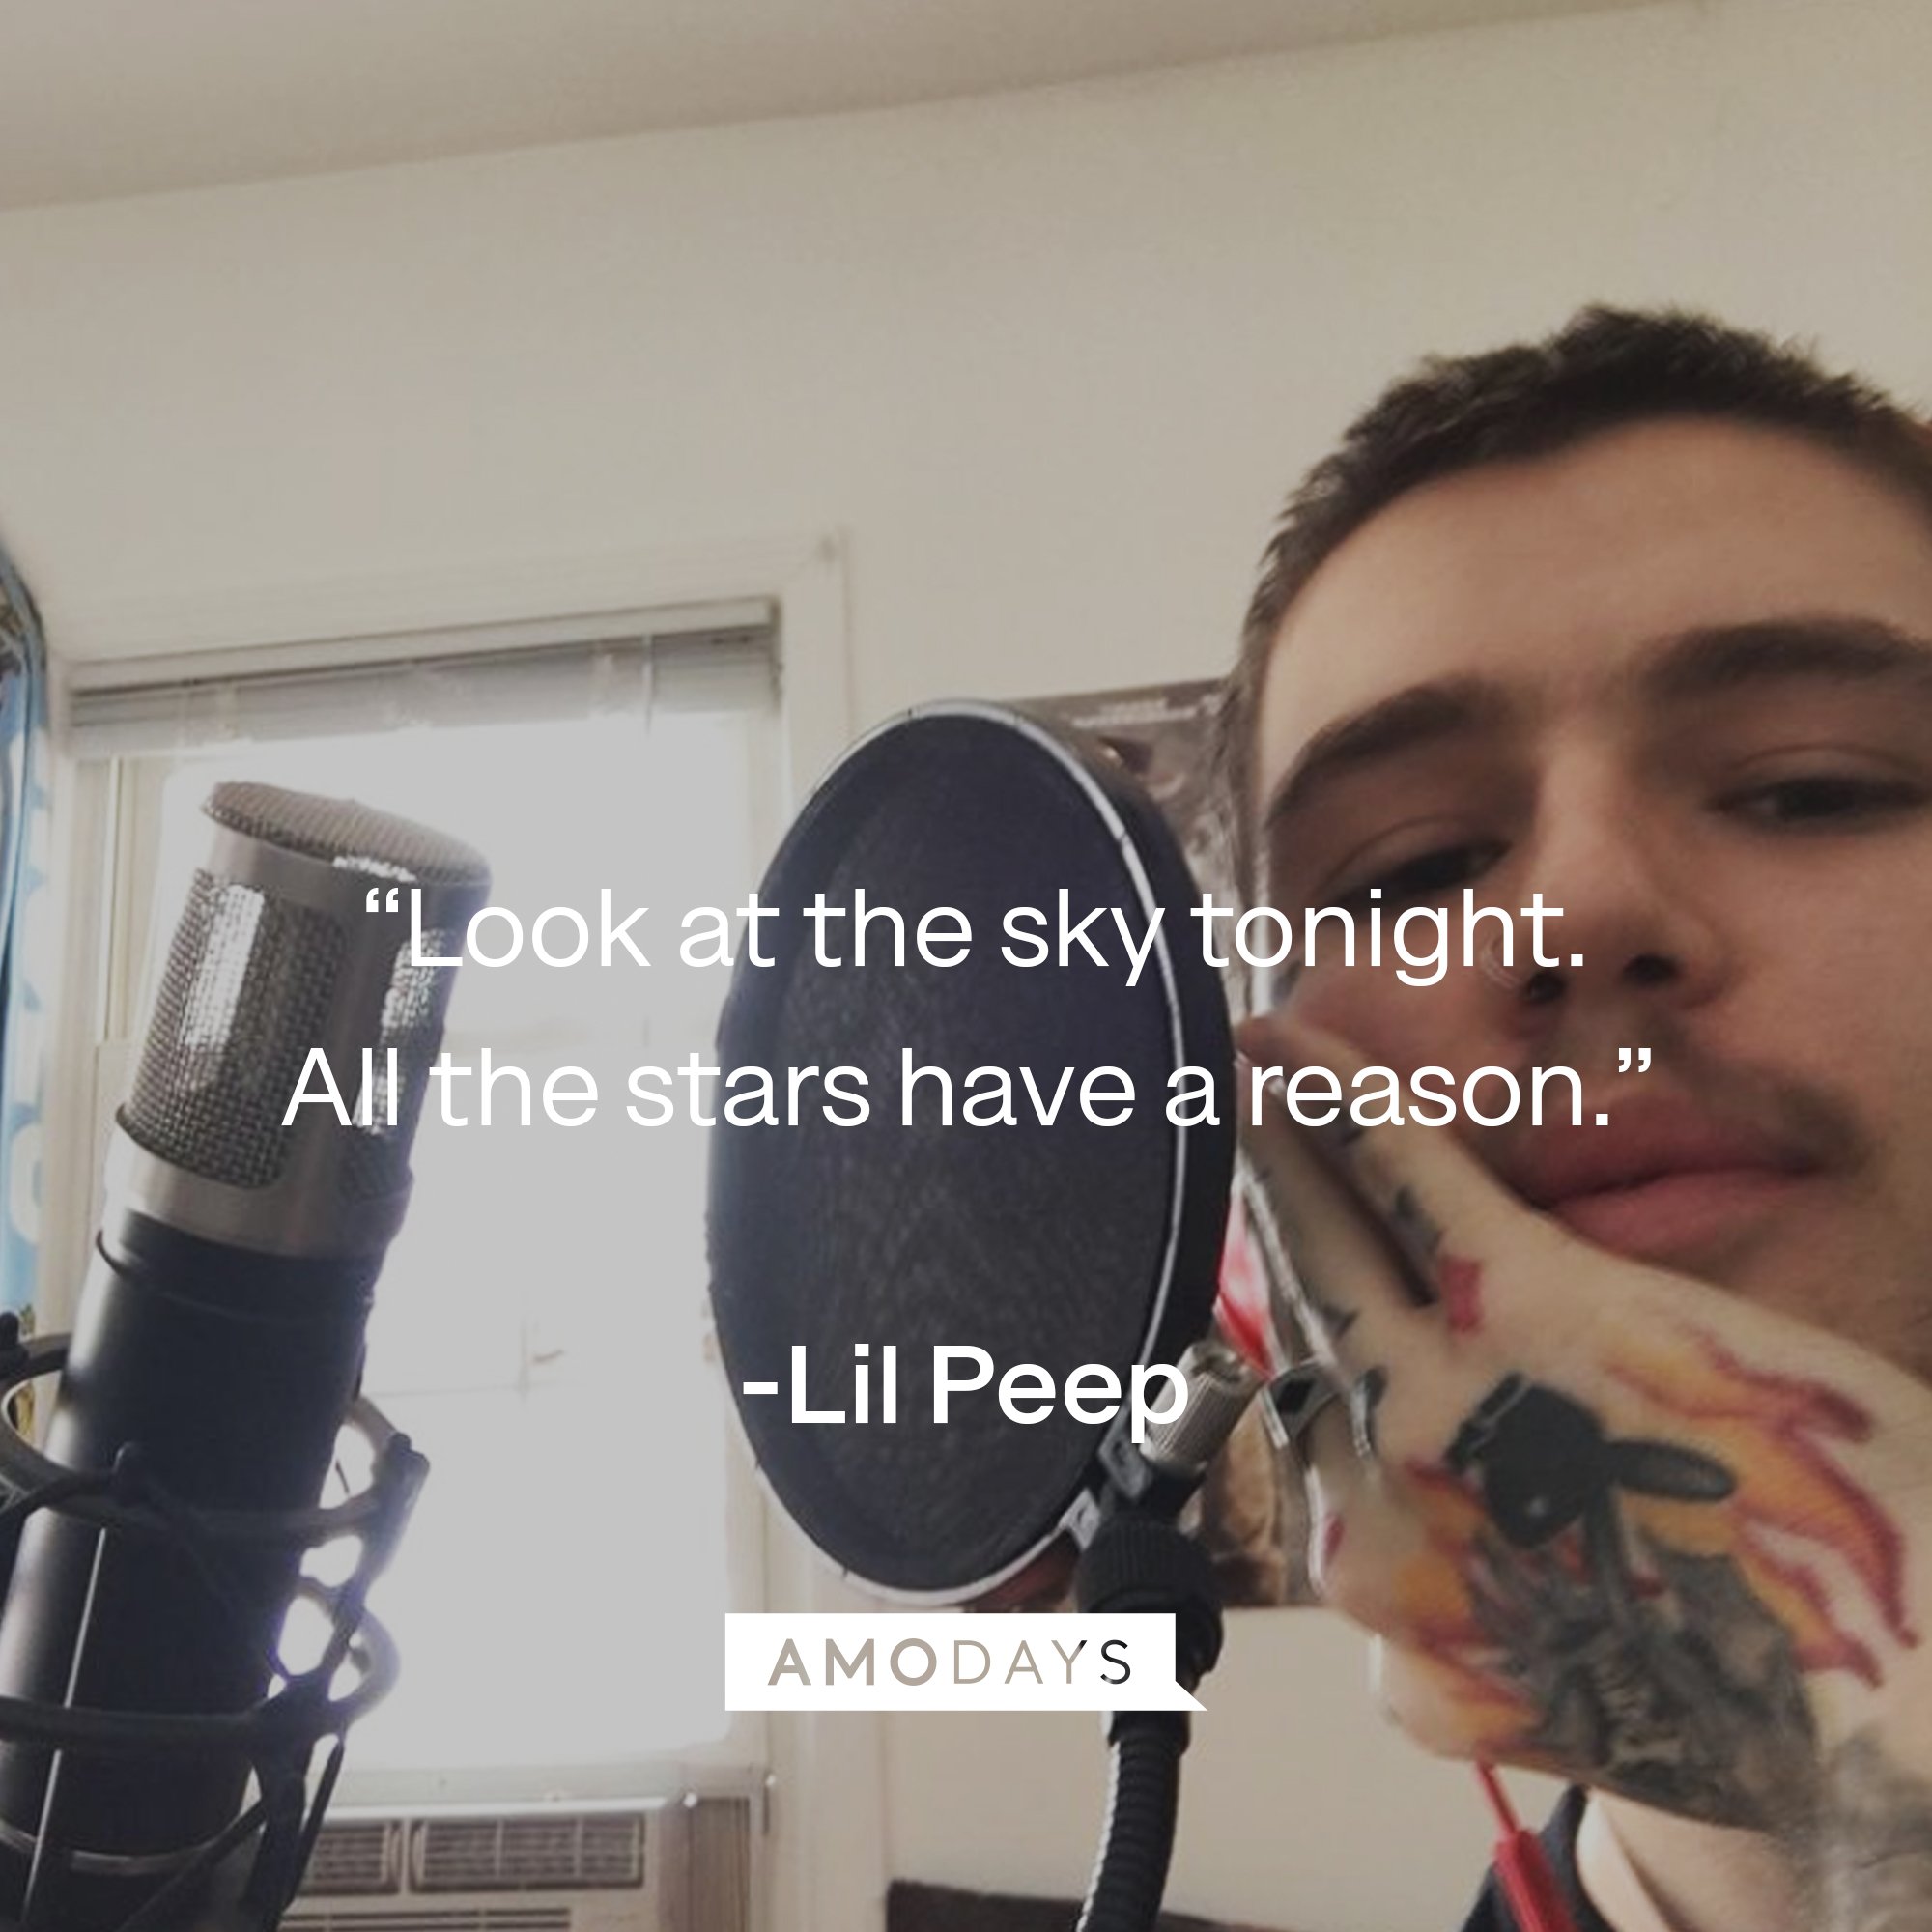 Lil Peep's quote: “Look at the sky tonight. All the stars have a reason.” | Image: AmoDays